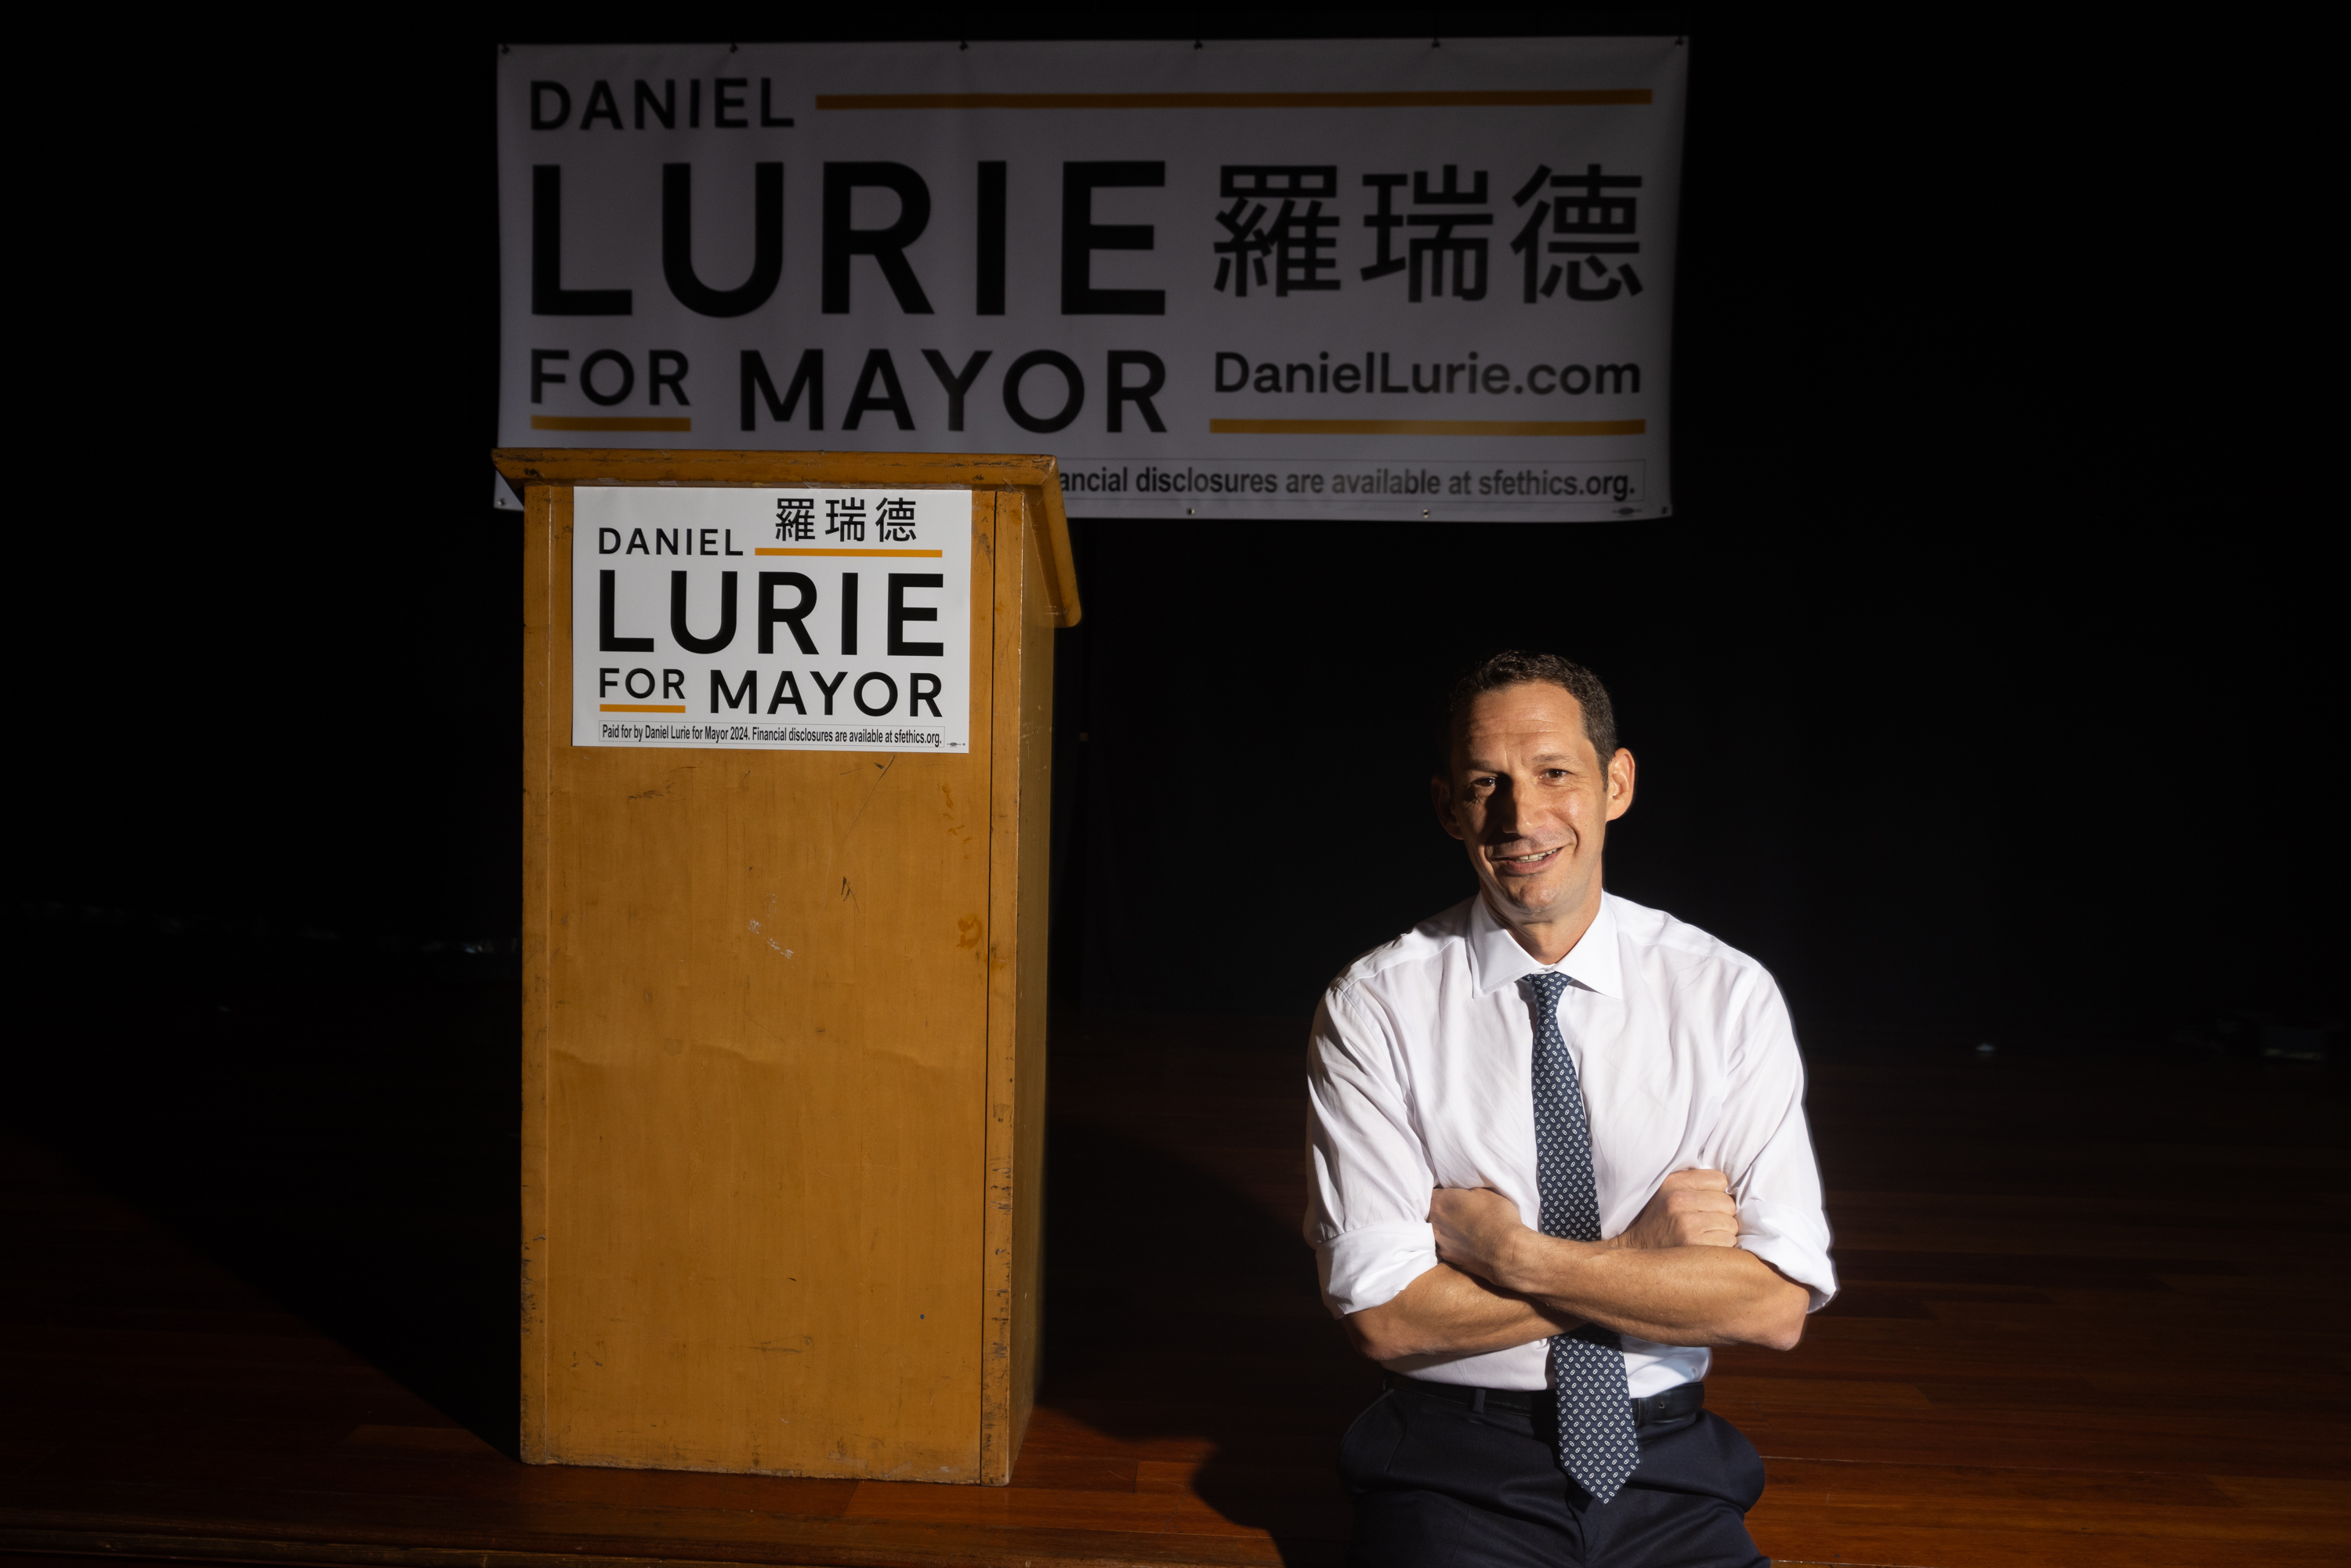 Man poses with arms crossed in front of sign Lurie for mayor